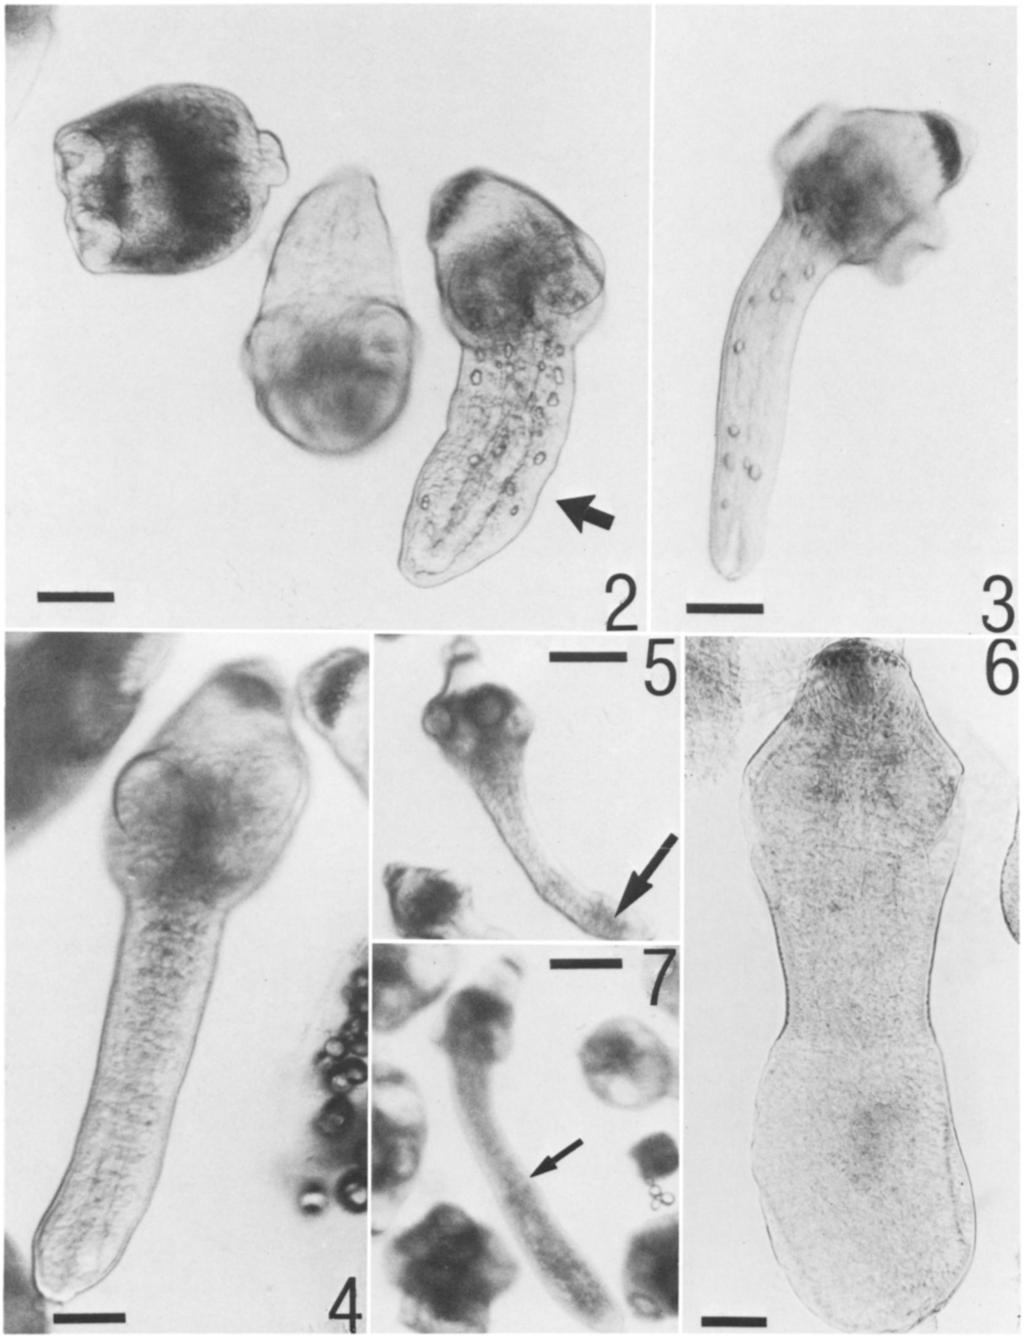 /I 242 THE JOURNAL OF PARASITOLOGY, VOL. 76, NO. 2, APRIL 1990 / /l 2-3 ''rt N., 4 / I t. /'. /.. %K -11 m FIGURES 2-7. Stages of development of Echinococcus multilocularis in vitro. 2. Day 4, showing evaginated, vermiform stage (arrow) and unevaginated form on the far left.